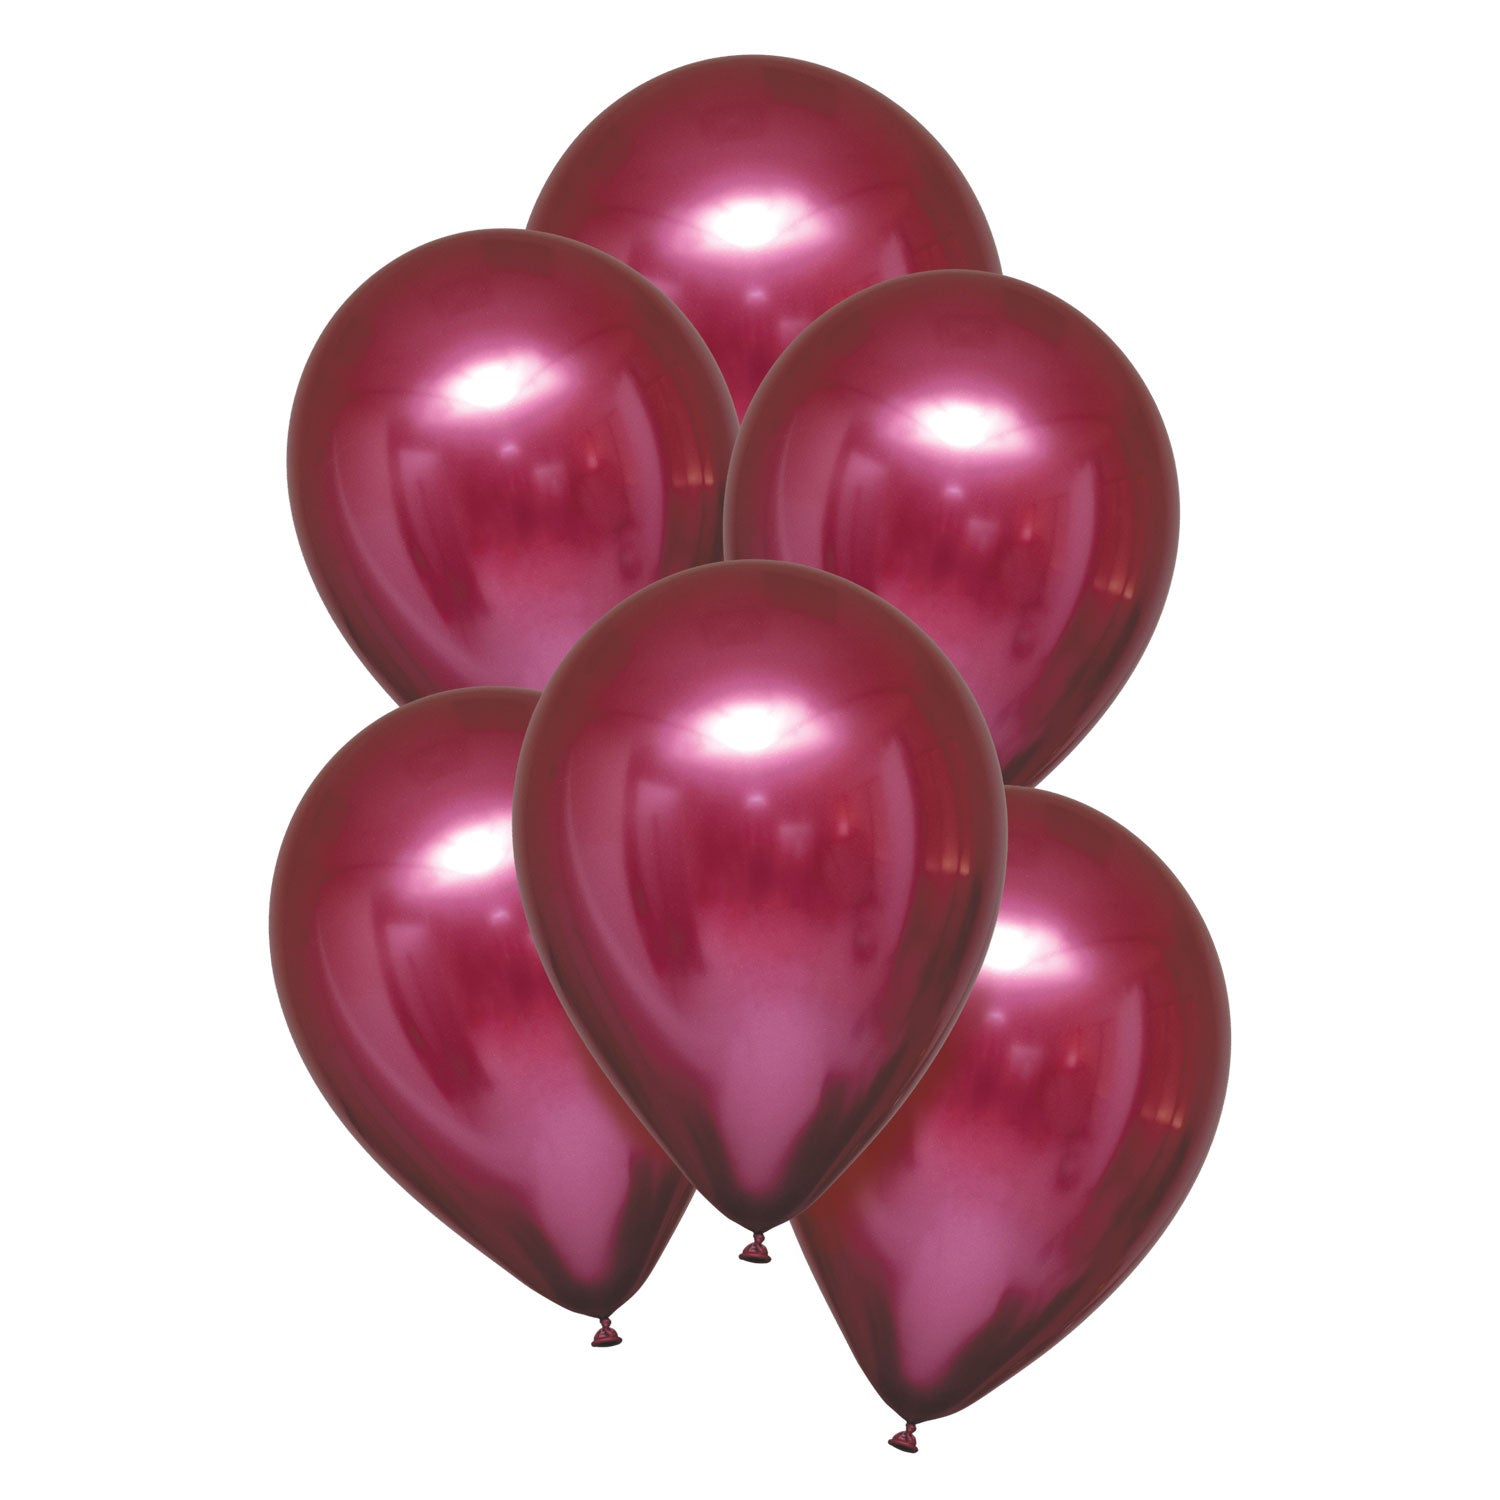 Pomegranate Satin Luxe Latex Balloons. Will inflate up to 27cm. Suitable for Air fill or Helium fill.